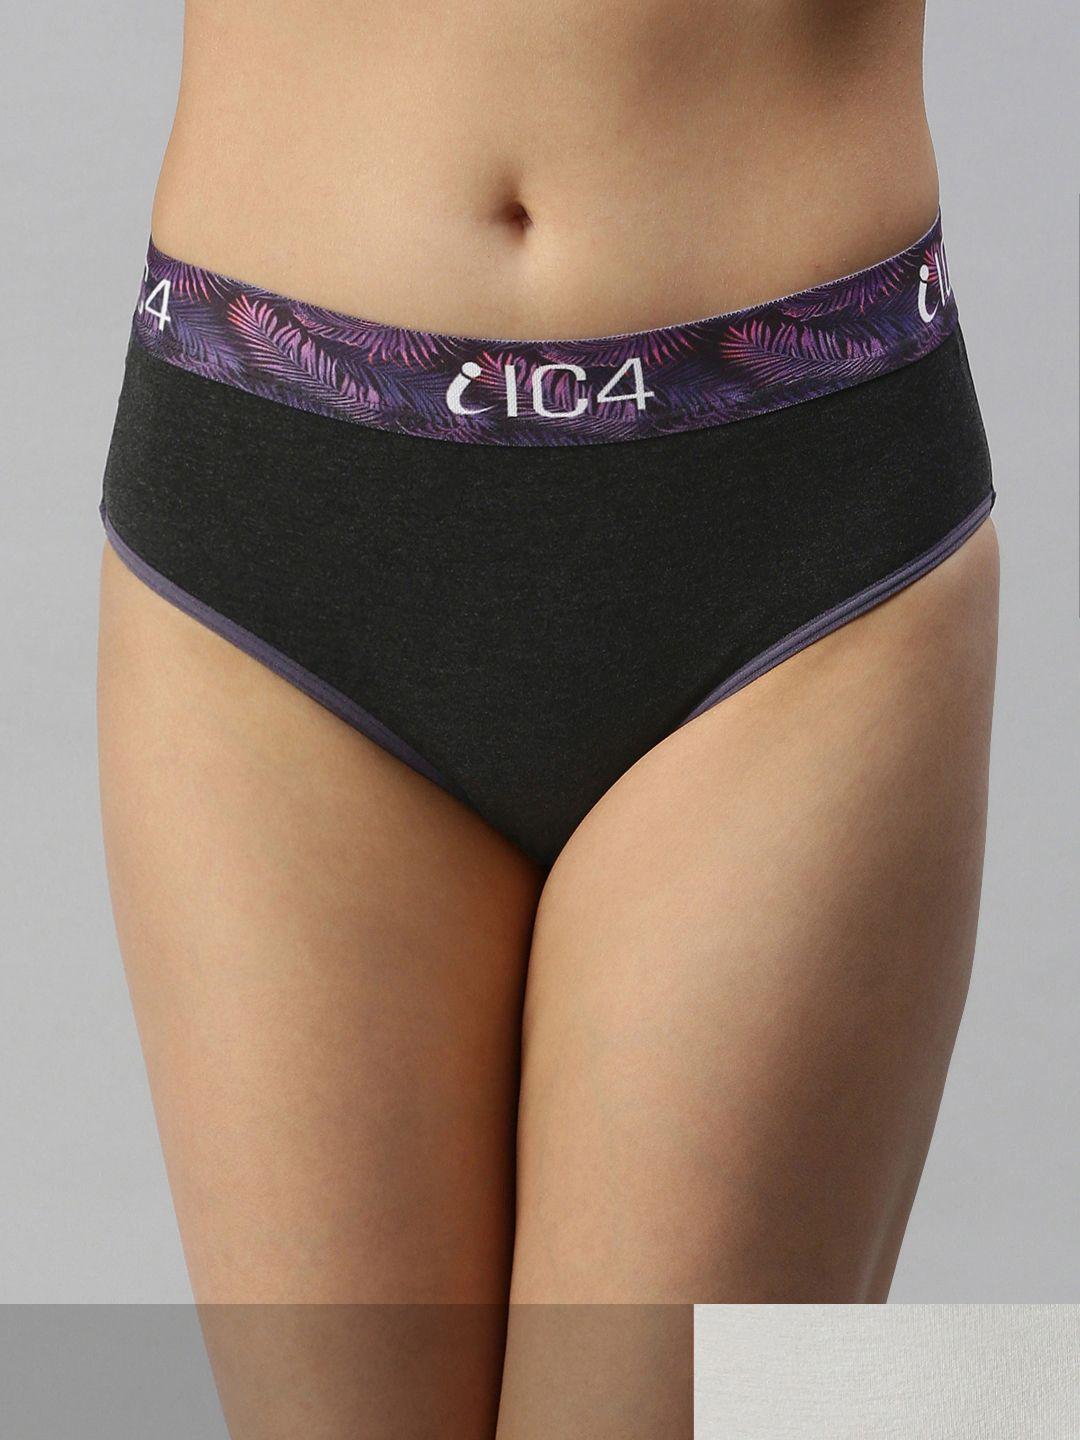 ic4 women charcoal & white solid pack of 2 hipster briefs- 0c-w-1011p2